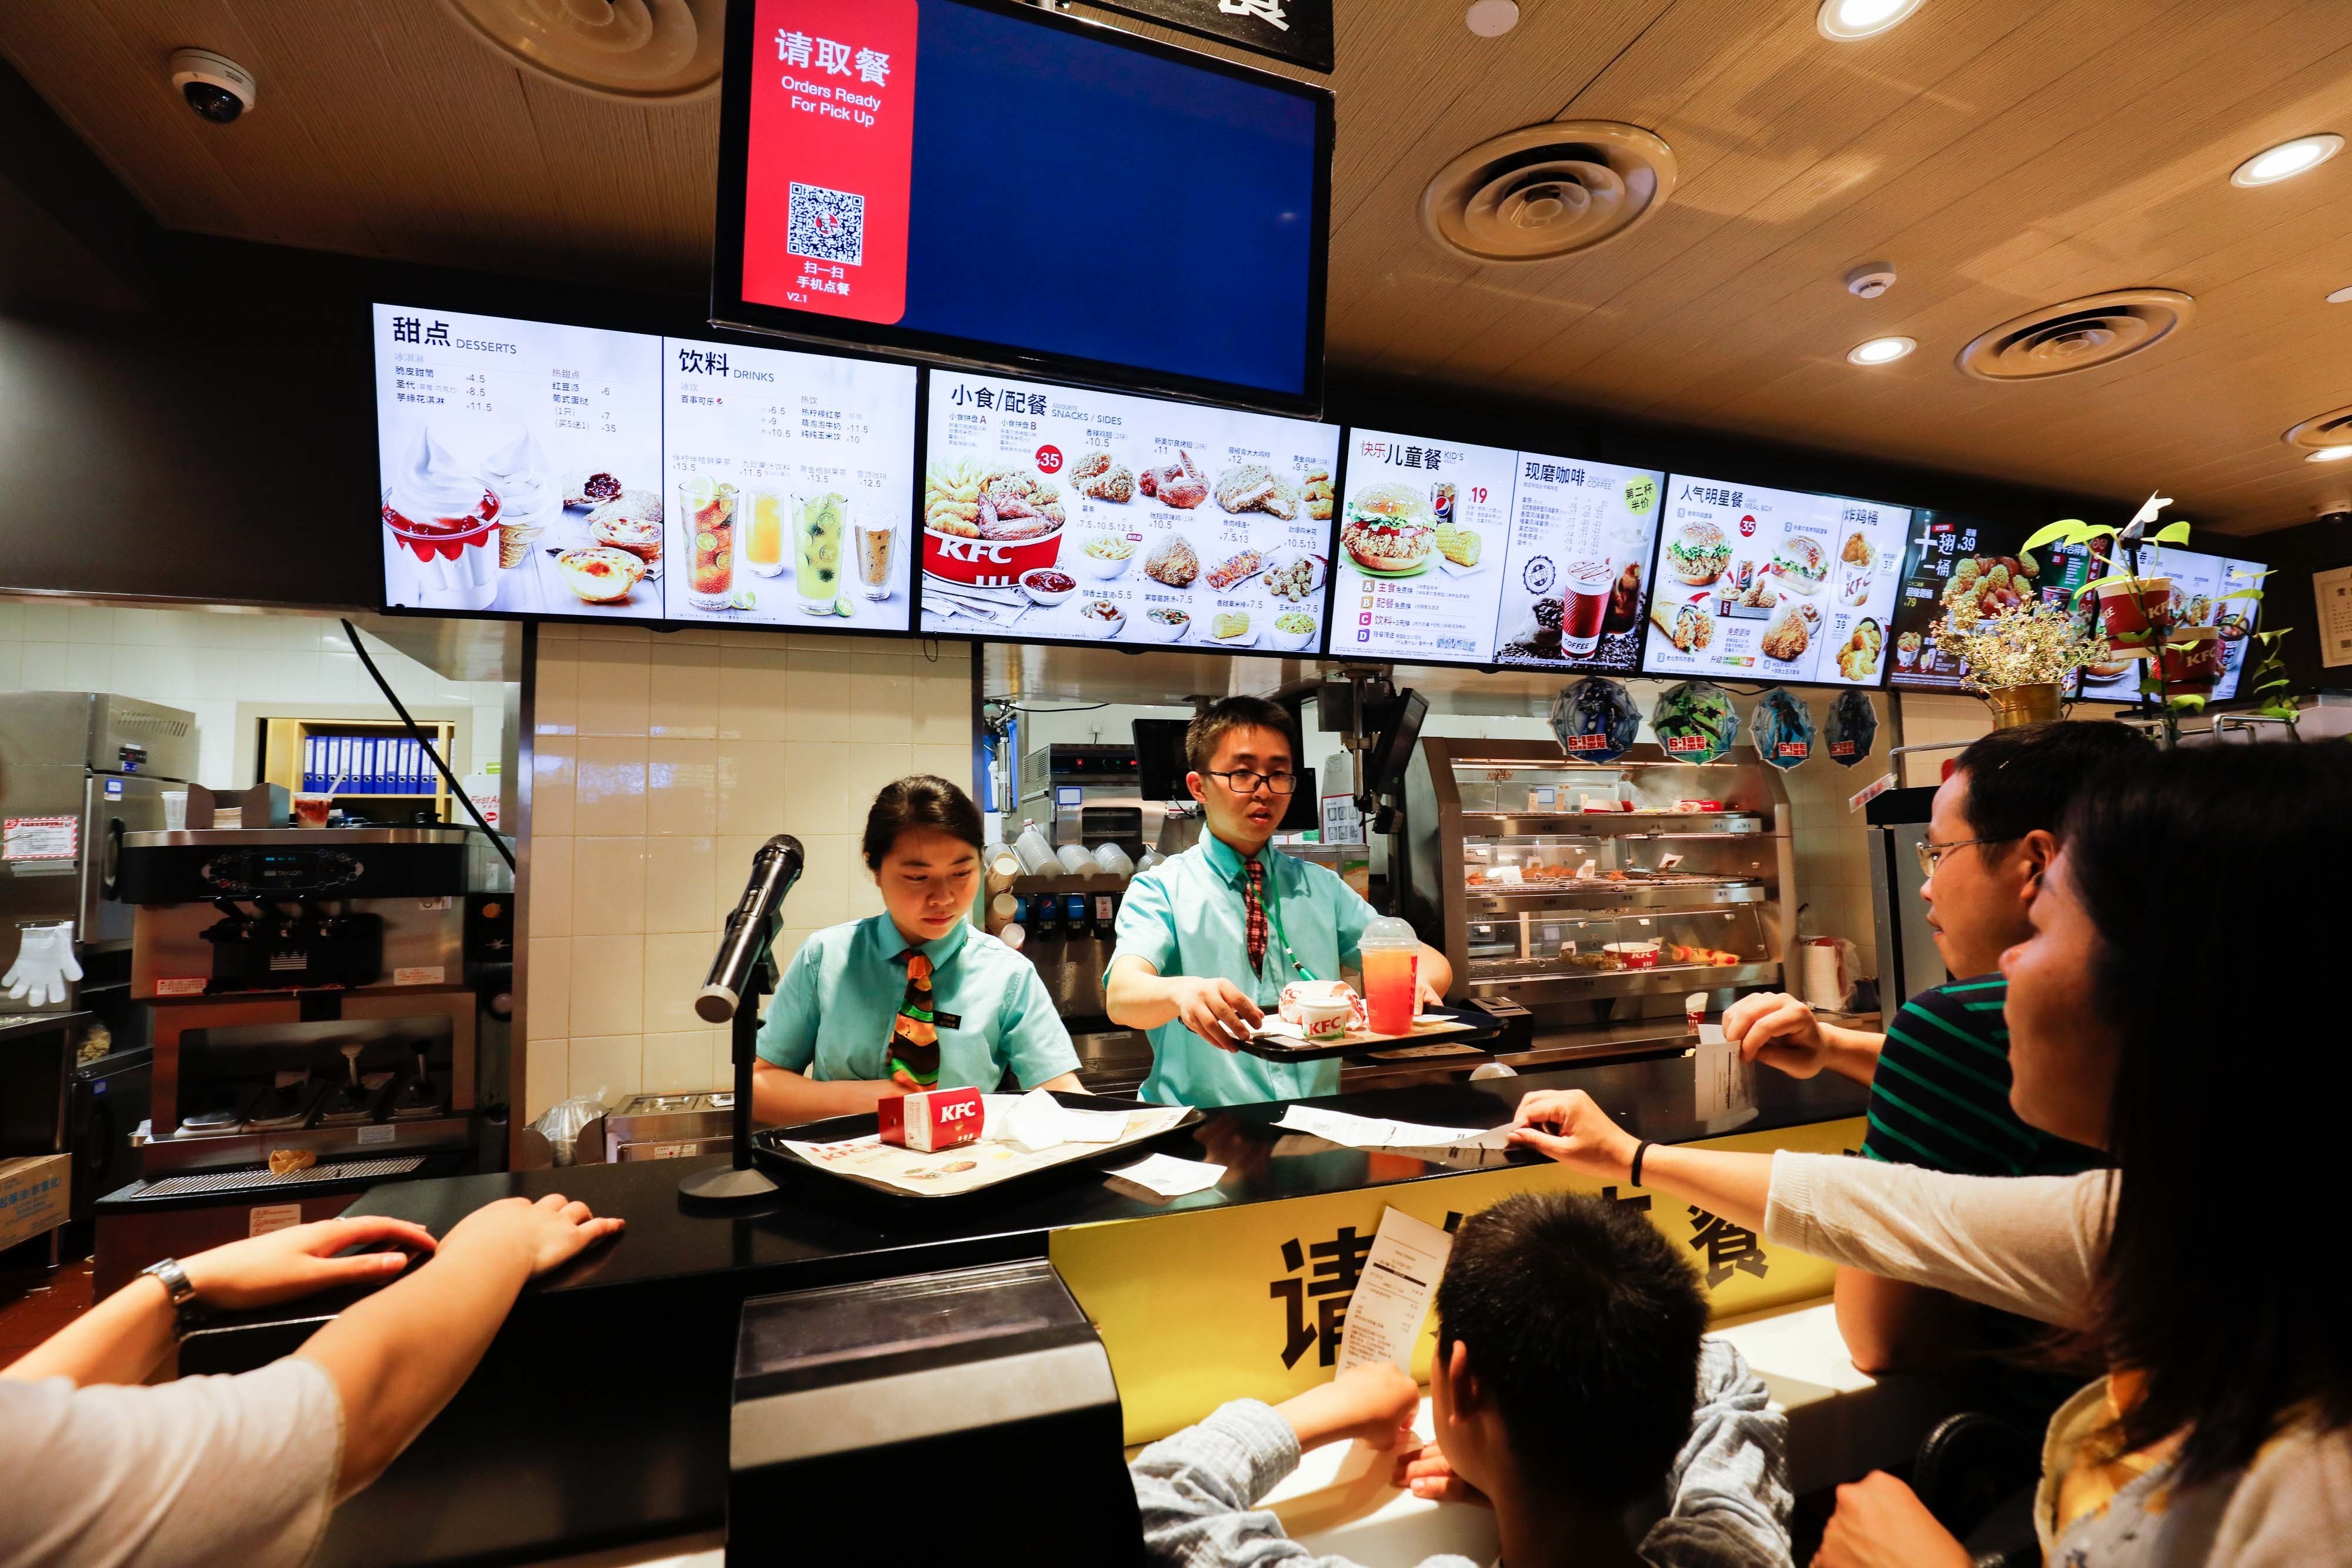 Yum China Kfc Hit By Rising Poultry Prices In China Amid African